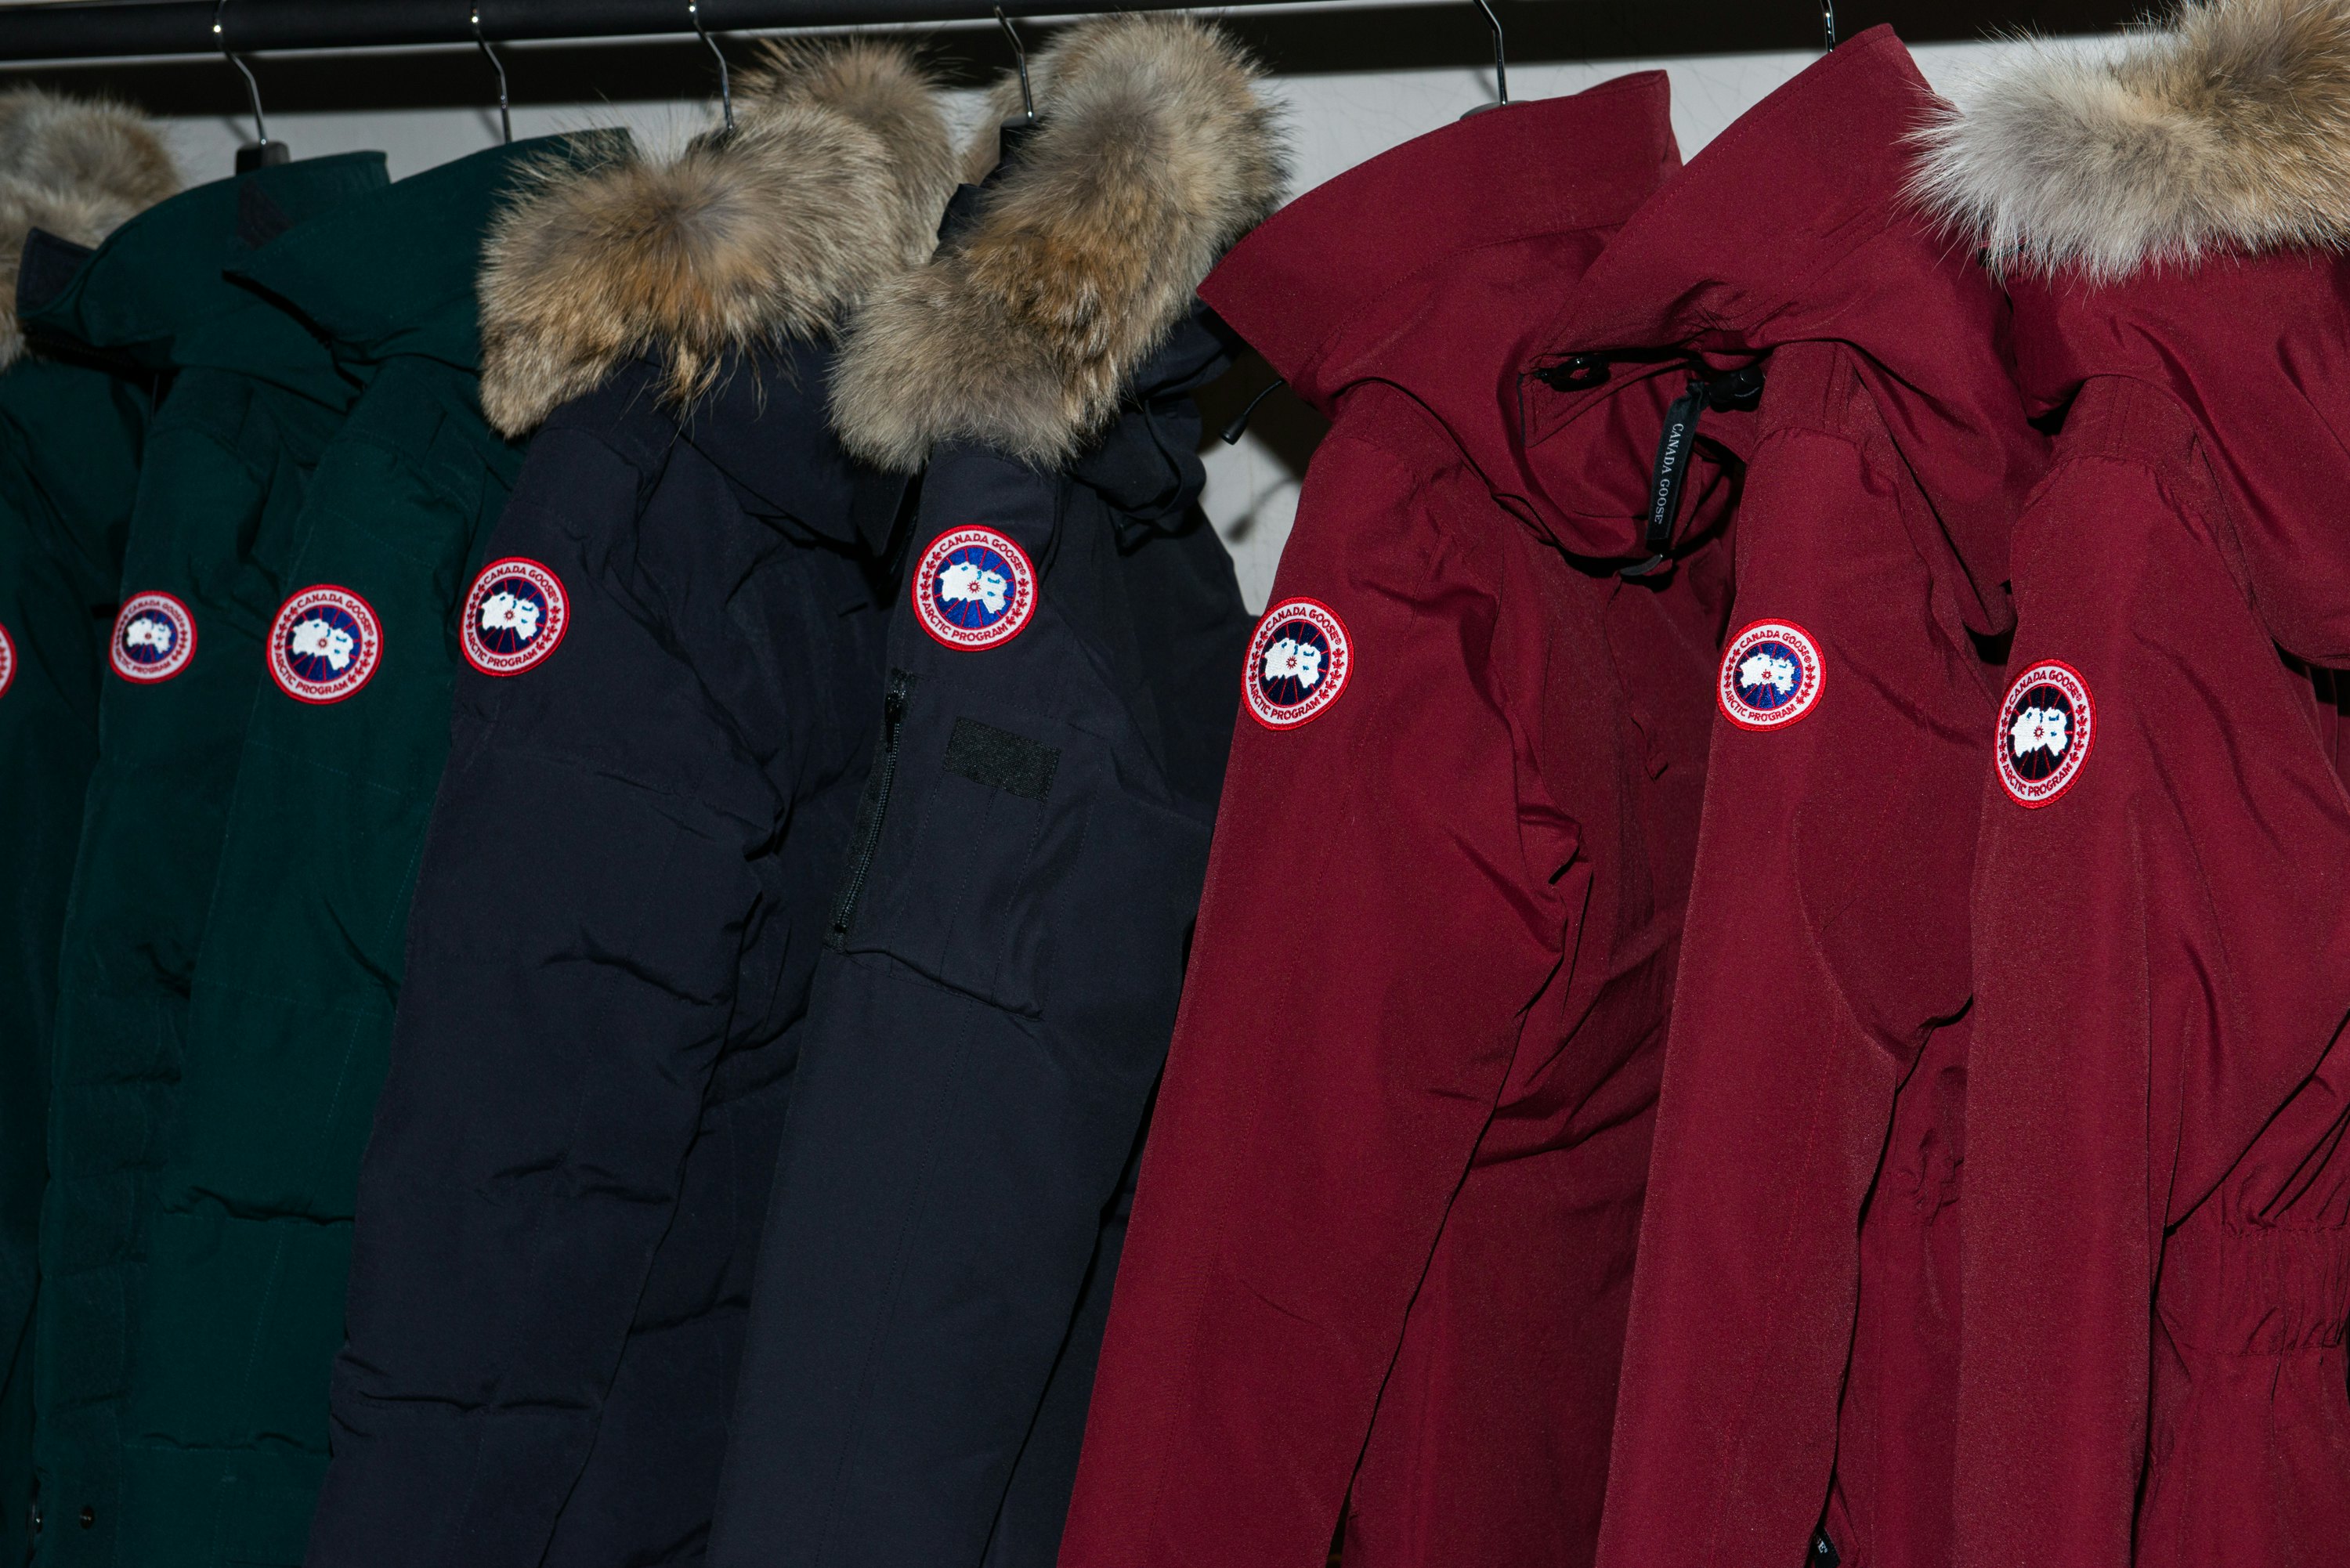 News: Canada Goose plans to stop using fur by 2022